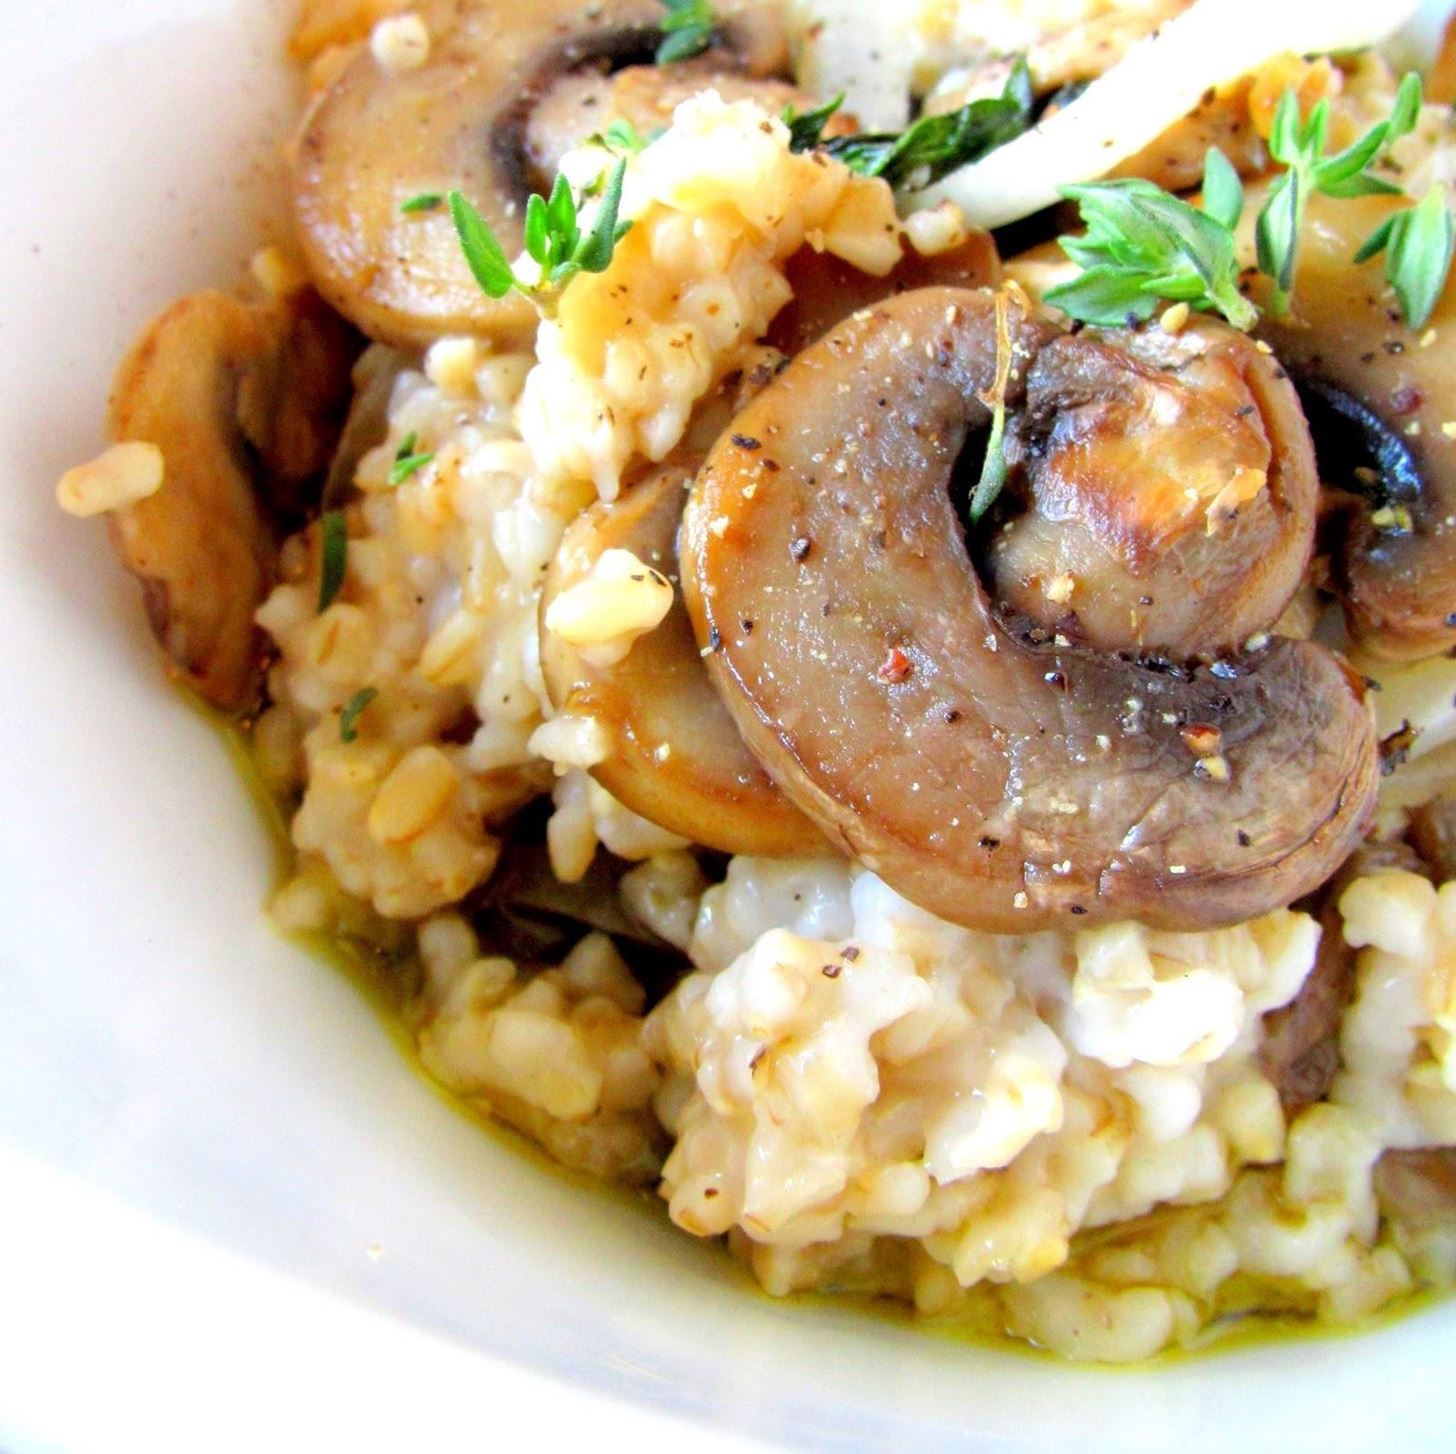 Flip Your Breakfast Script with These Savory Oatmeal Ideas